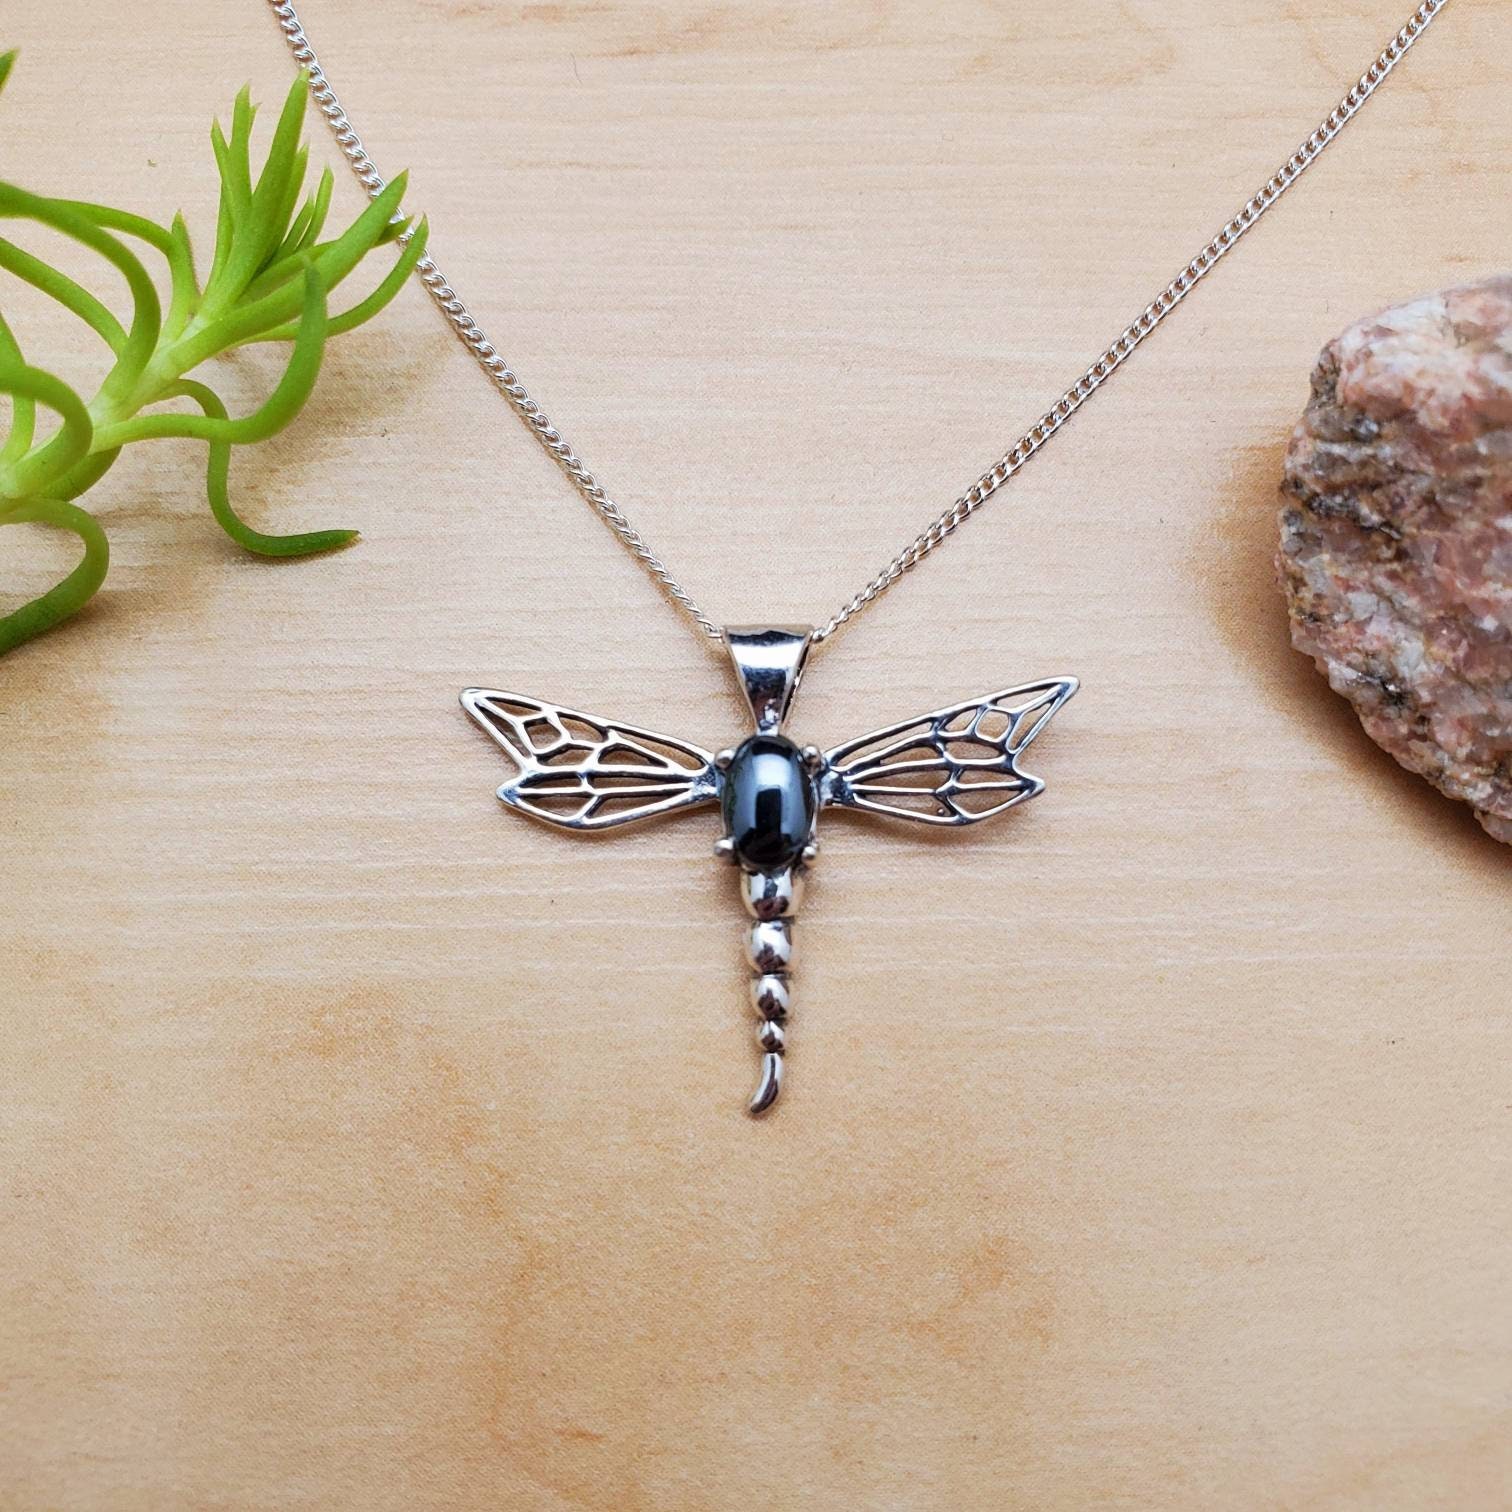 925ForHer Dainty Dragronfly Necklace Pendant With Silver Chain | Etsy